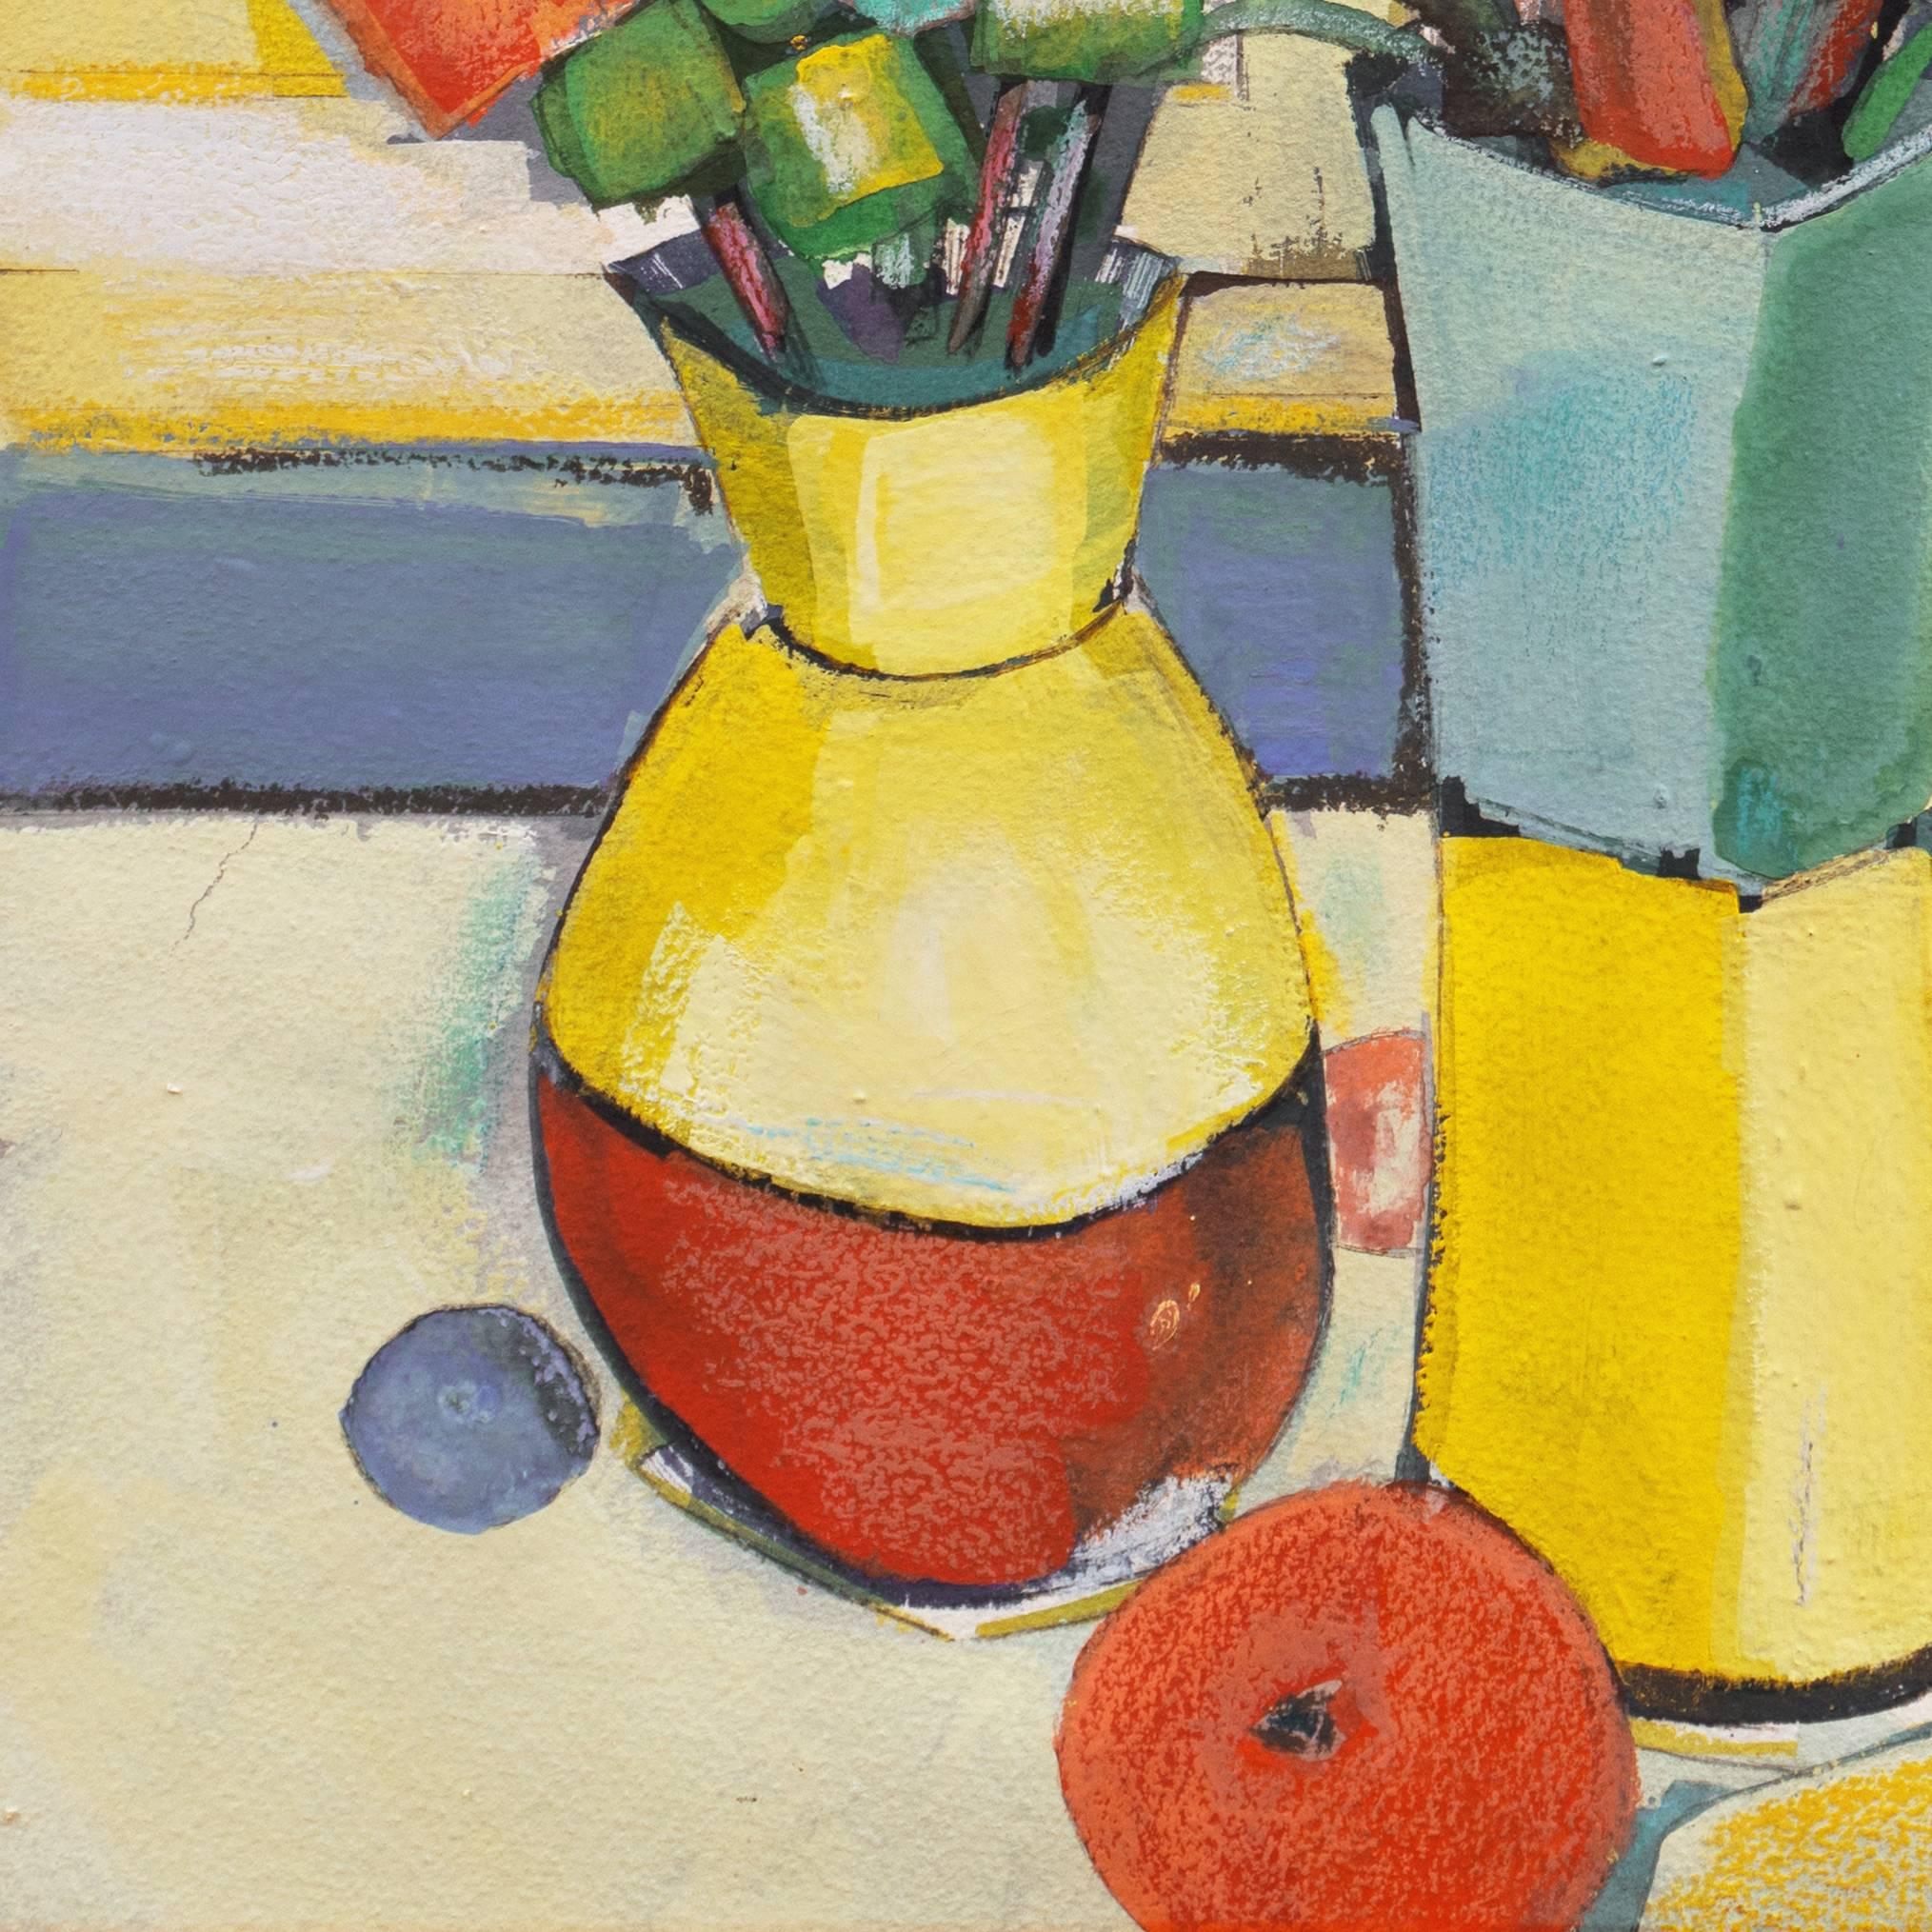 A bouquet of bold flowers comprising overlapping washes of primary colors against a variegated pale yellow background in the style of the Le Jeune Peinture Movement. 

Signed lower right, 'R. Couturier' for Rene Couturier (French, born 1933);